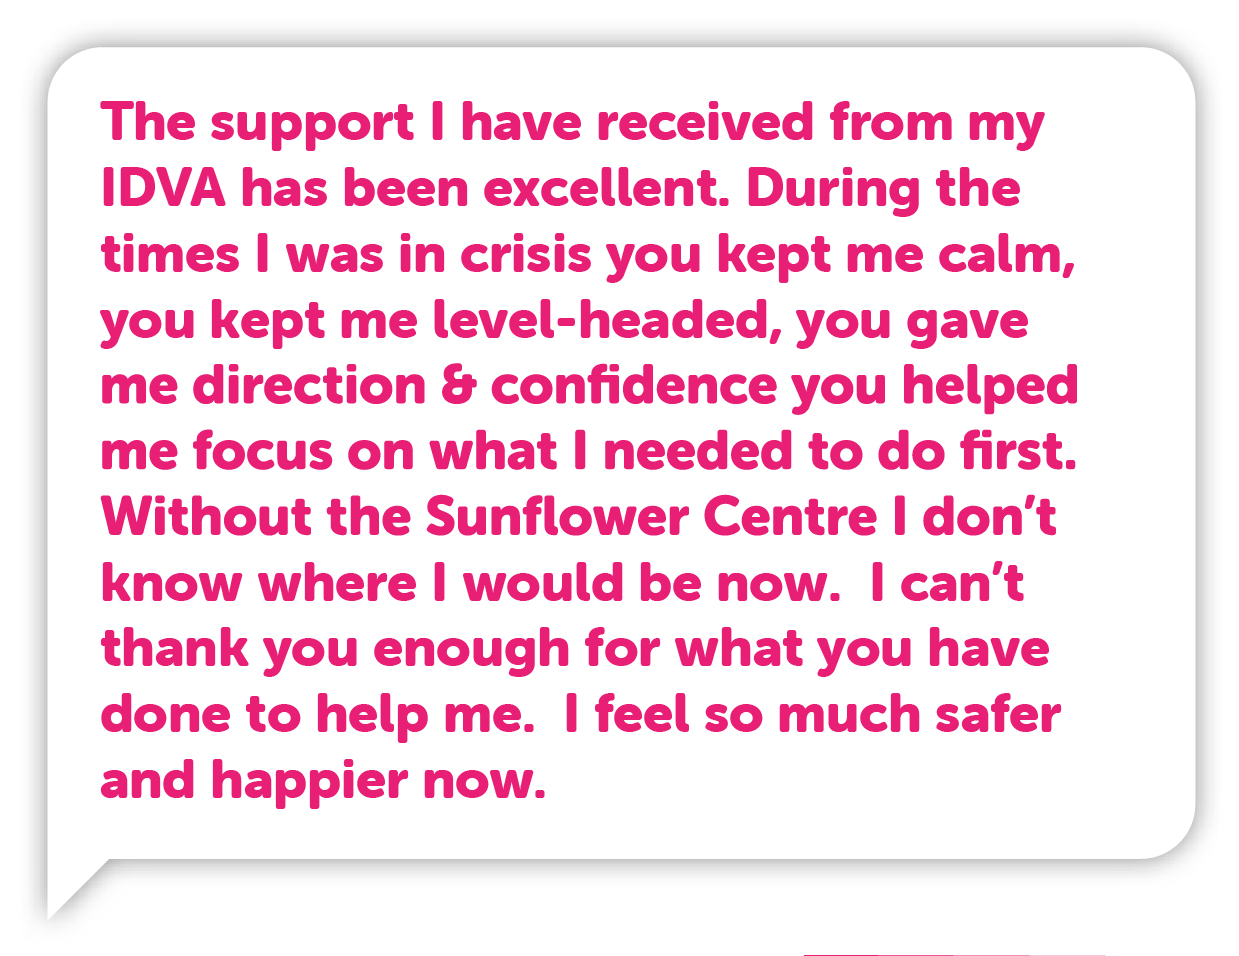 “The support I have received from my IDVA has been excellent. During the times I was in crisis you kept me calm, you kept me level-headed, you gave me direction & confidence you helped me focus on what I needed to do first. Without the Sunflower Centre I don’t know where I would be now. I can’t thank you enough for what you have done to help me. I feel so much safer and happier now.”